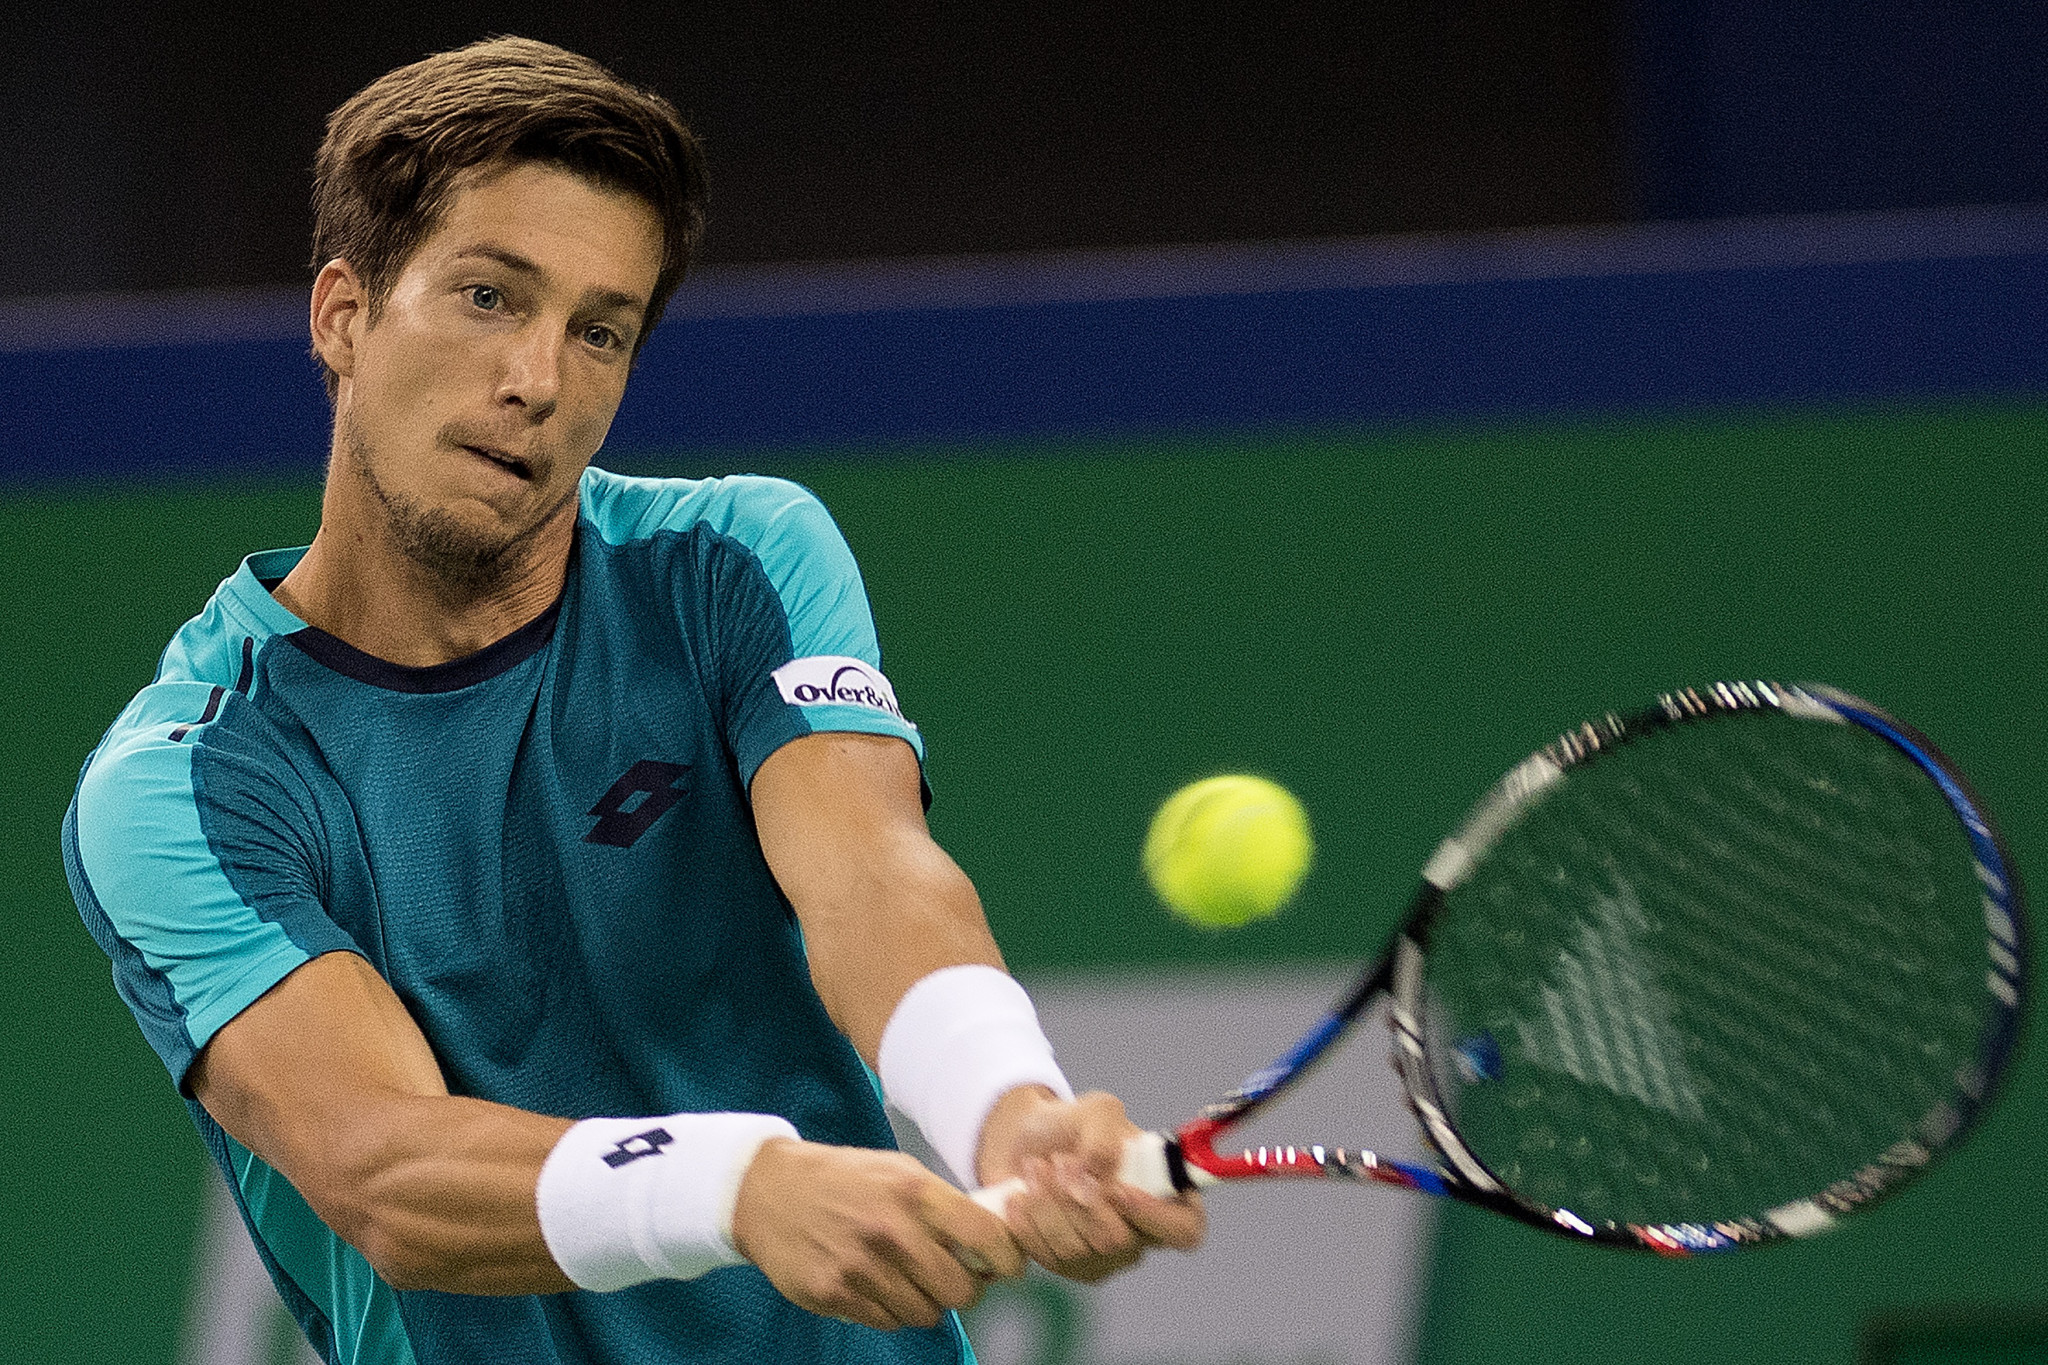 Bedene switches back to Slovenia in pursuit of Olympic dream